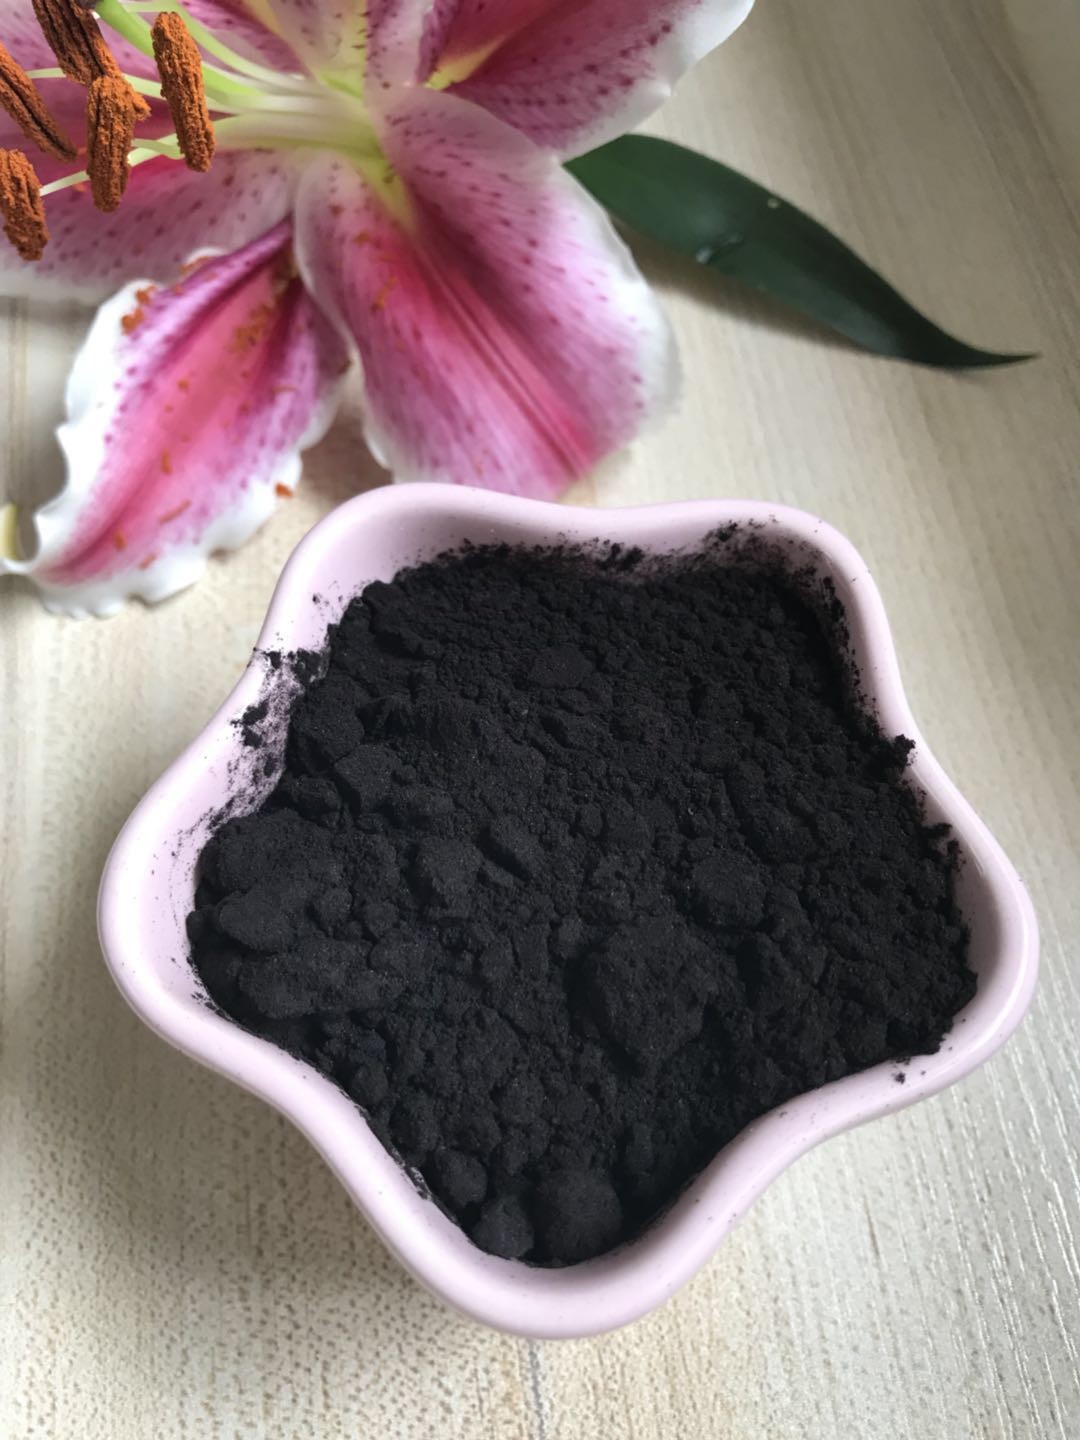 Wholesale Black 100 Pure Cocoa Powder 10%- 12% Fat Content , 200cfu/G Max Mould Count from china suppliers